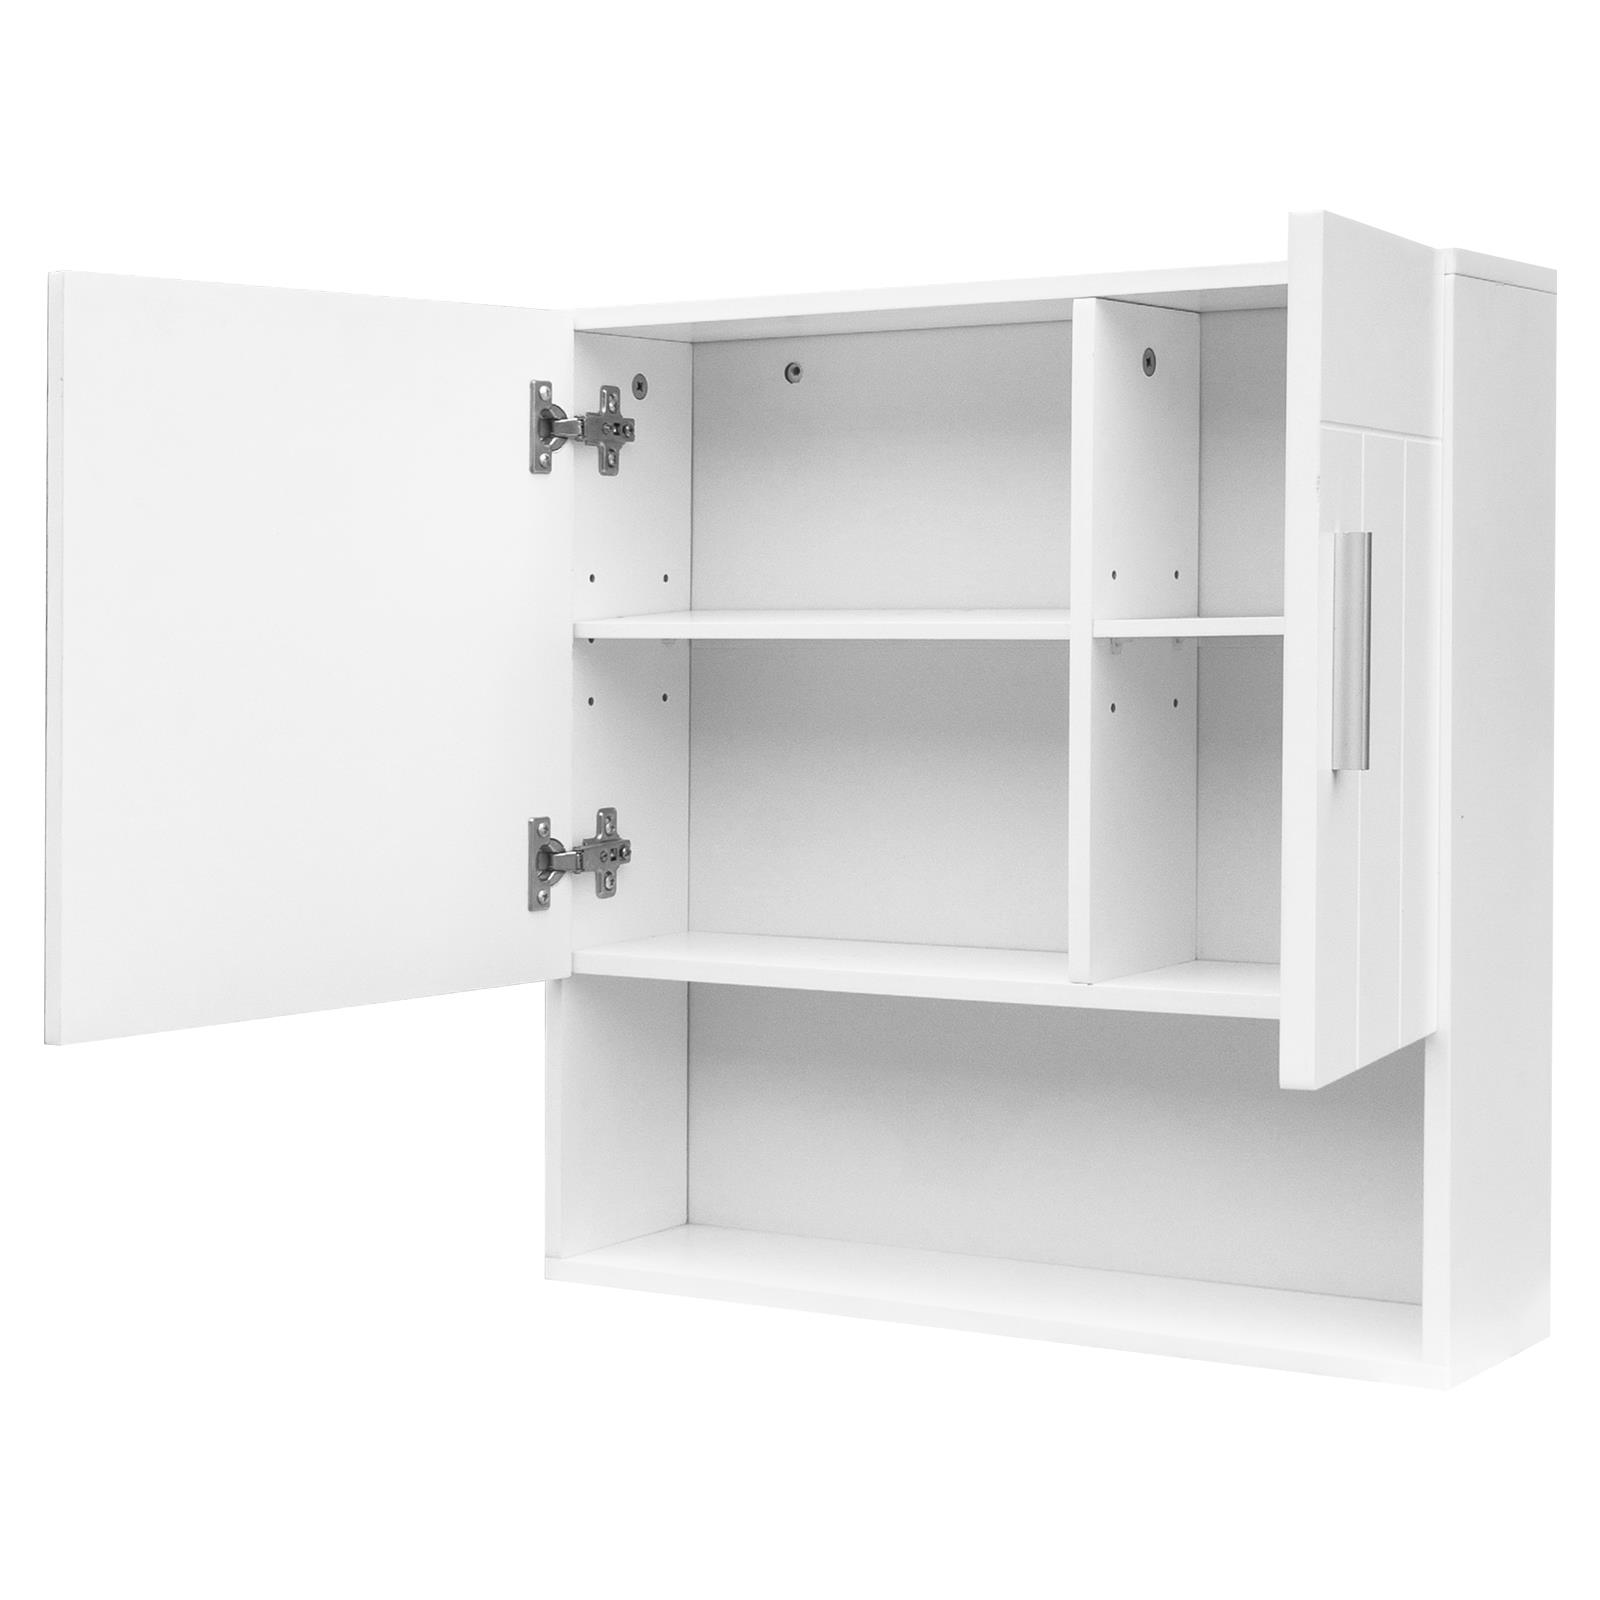 SalonMore Mirror Cabinet, Mirrored Storage Wall Cabinet, Wall Mounted Medicine Cabinet with Mirror Doors & Shelf Bathroom White - image 5 of 5